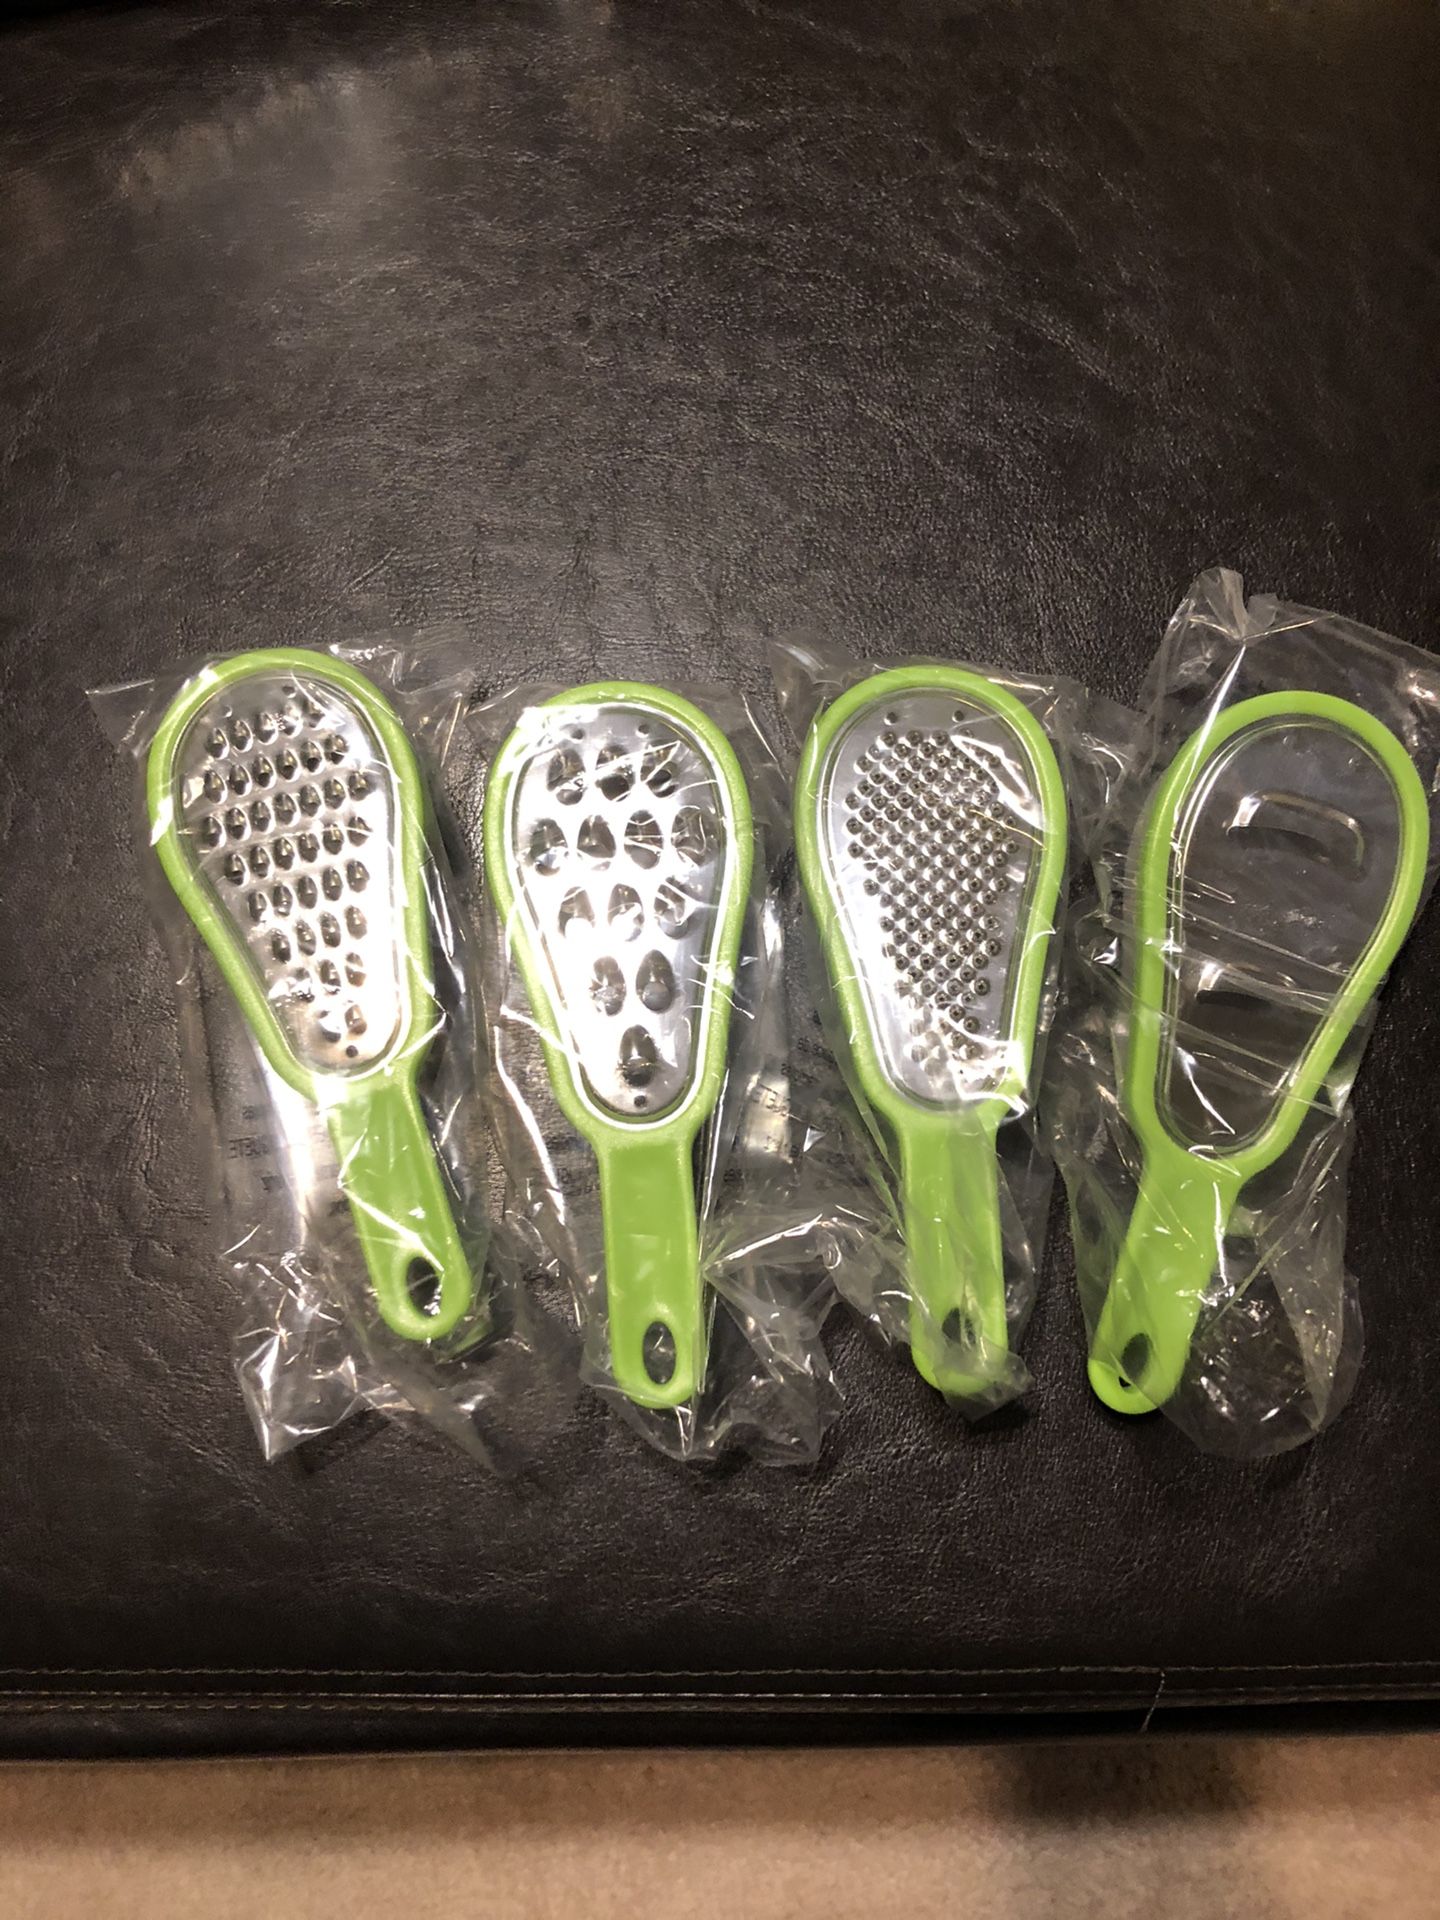 4 mini cheese graters